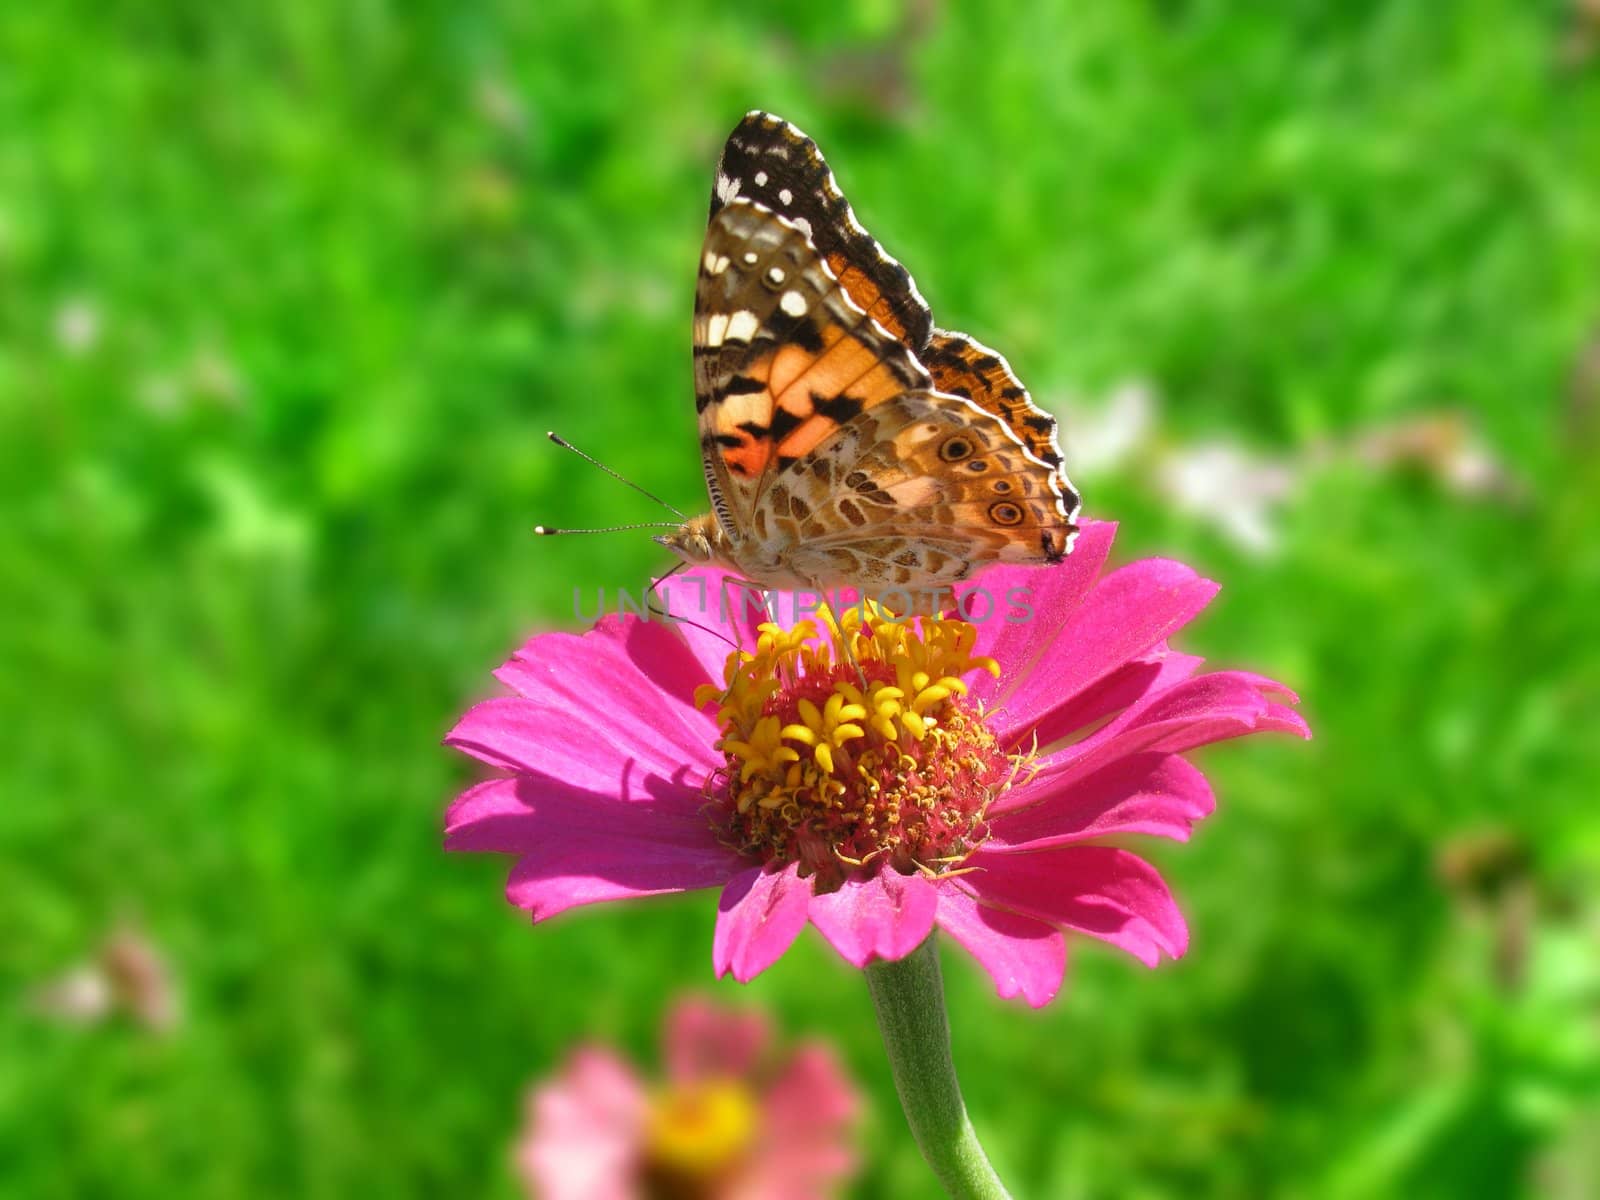 butterfly (Painted Lady) on flower (zinnia) over green